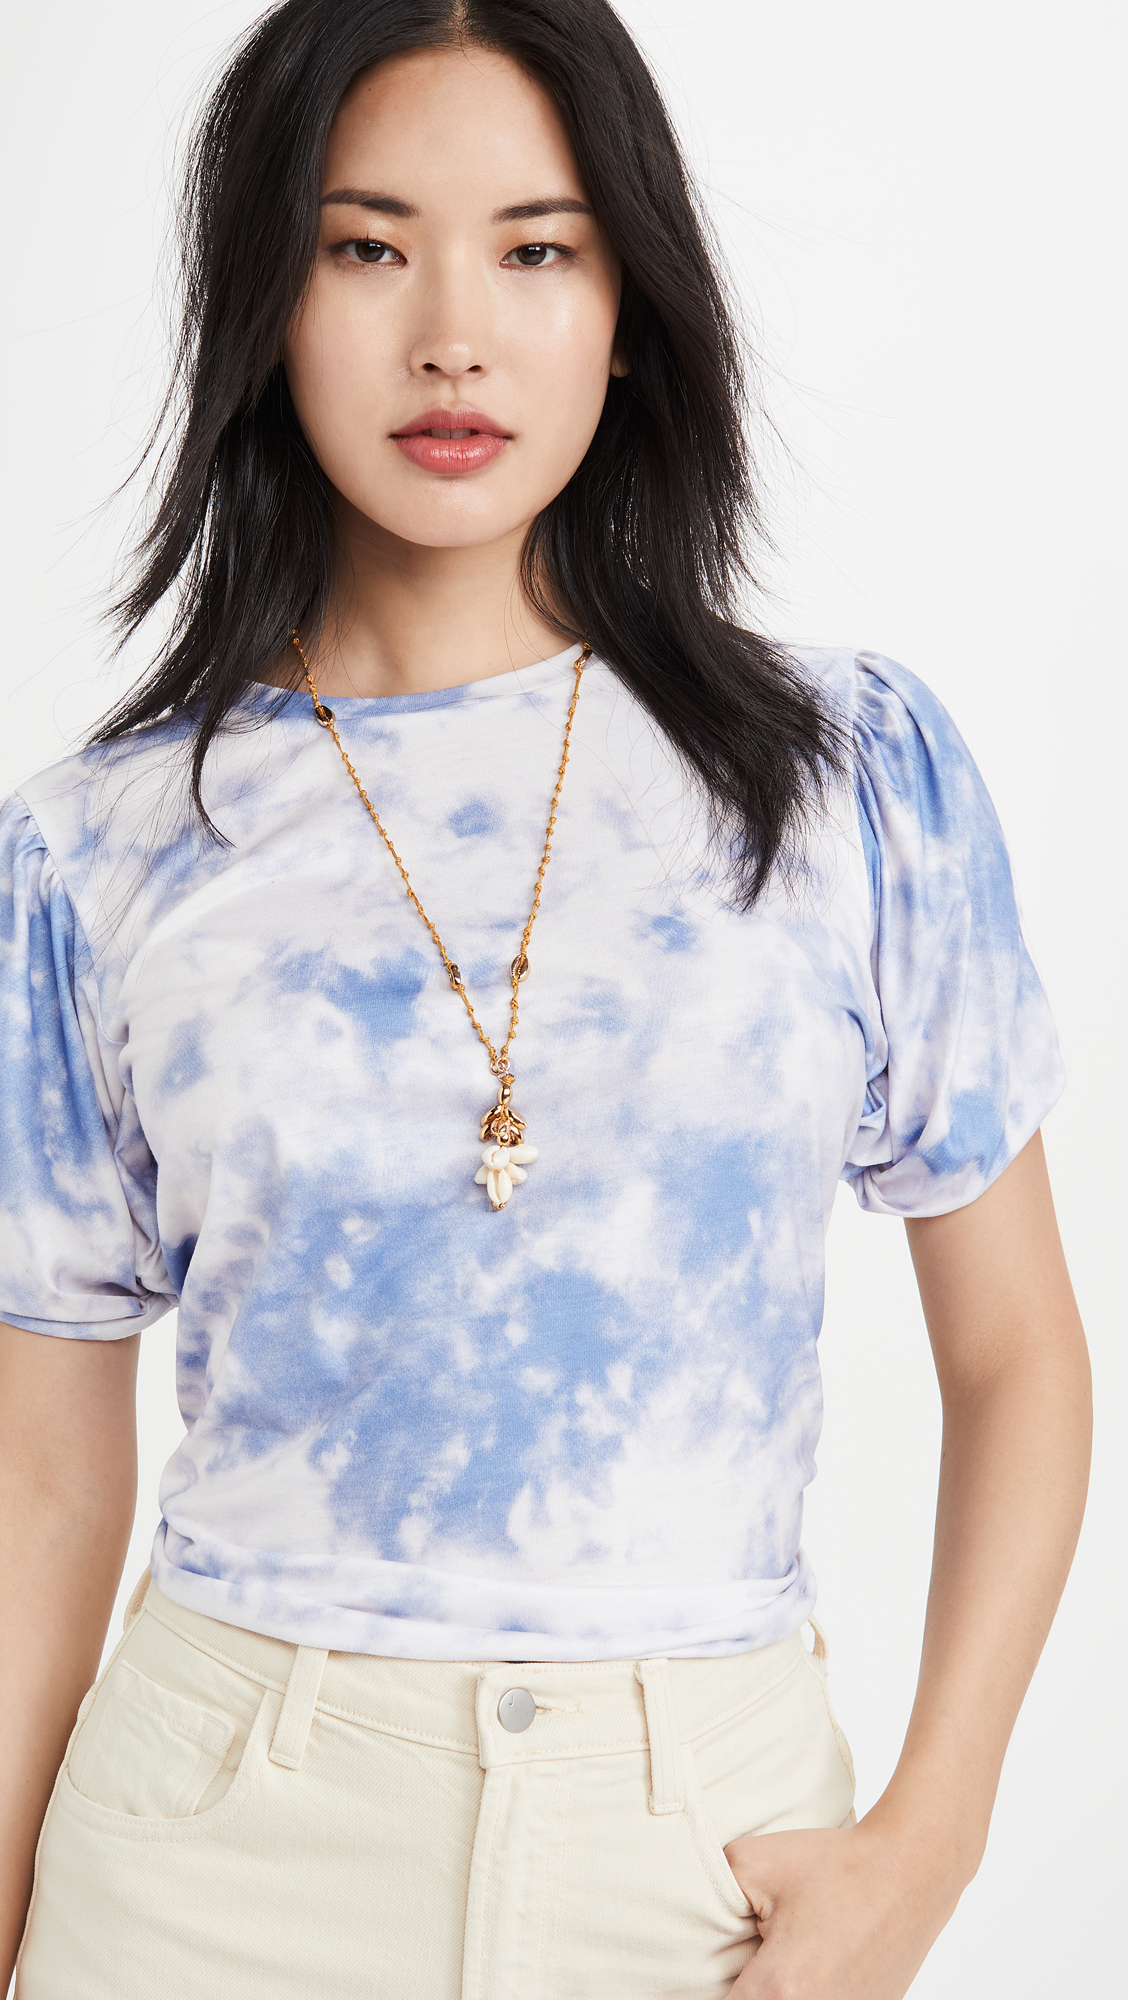 12 Stylish Tie-Dye Outfits That Are So On-Trend | Who What Wear